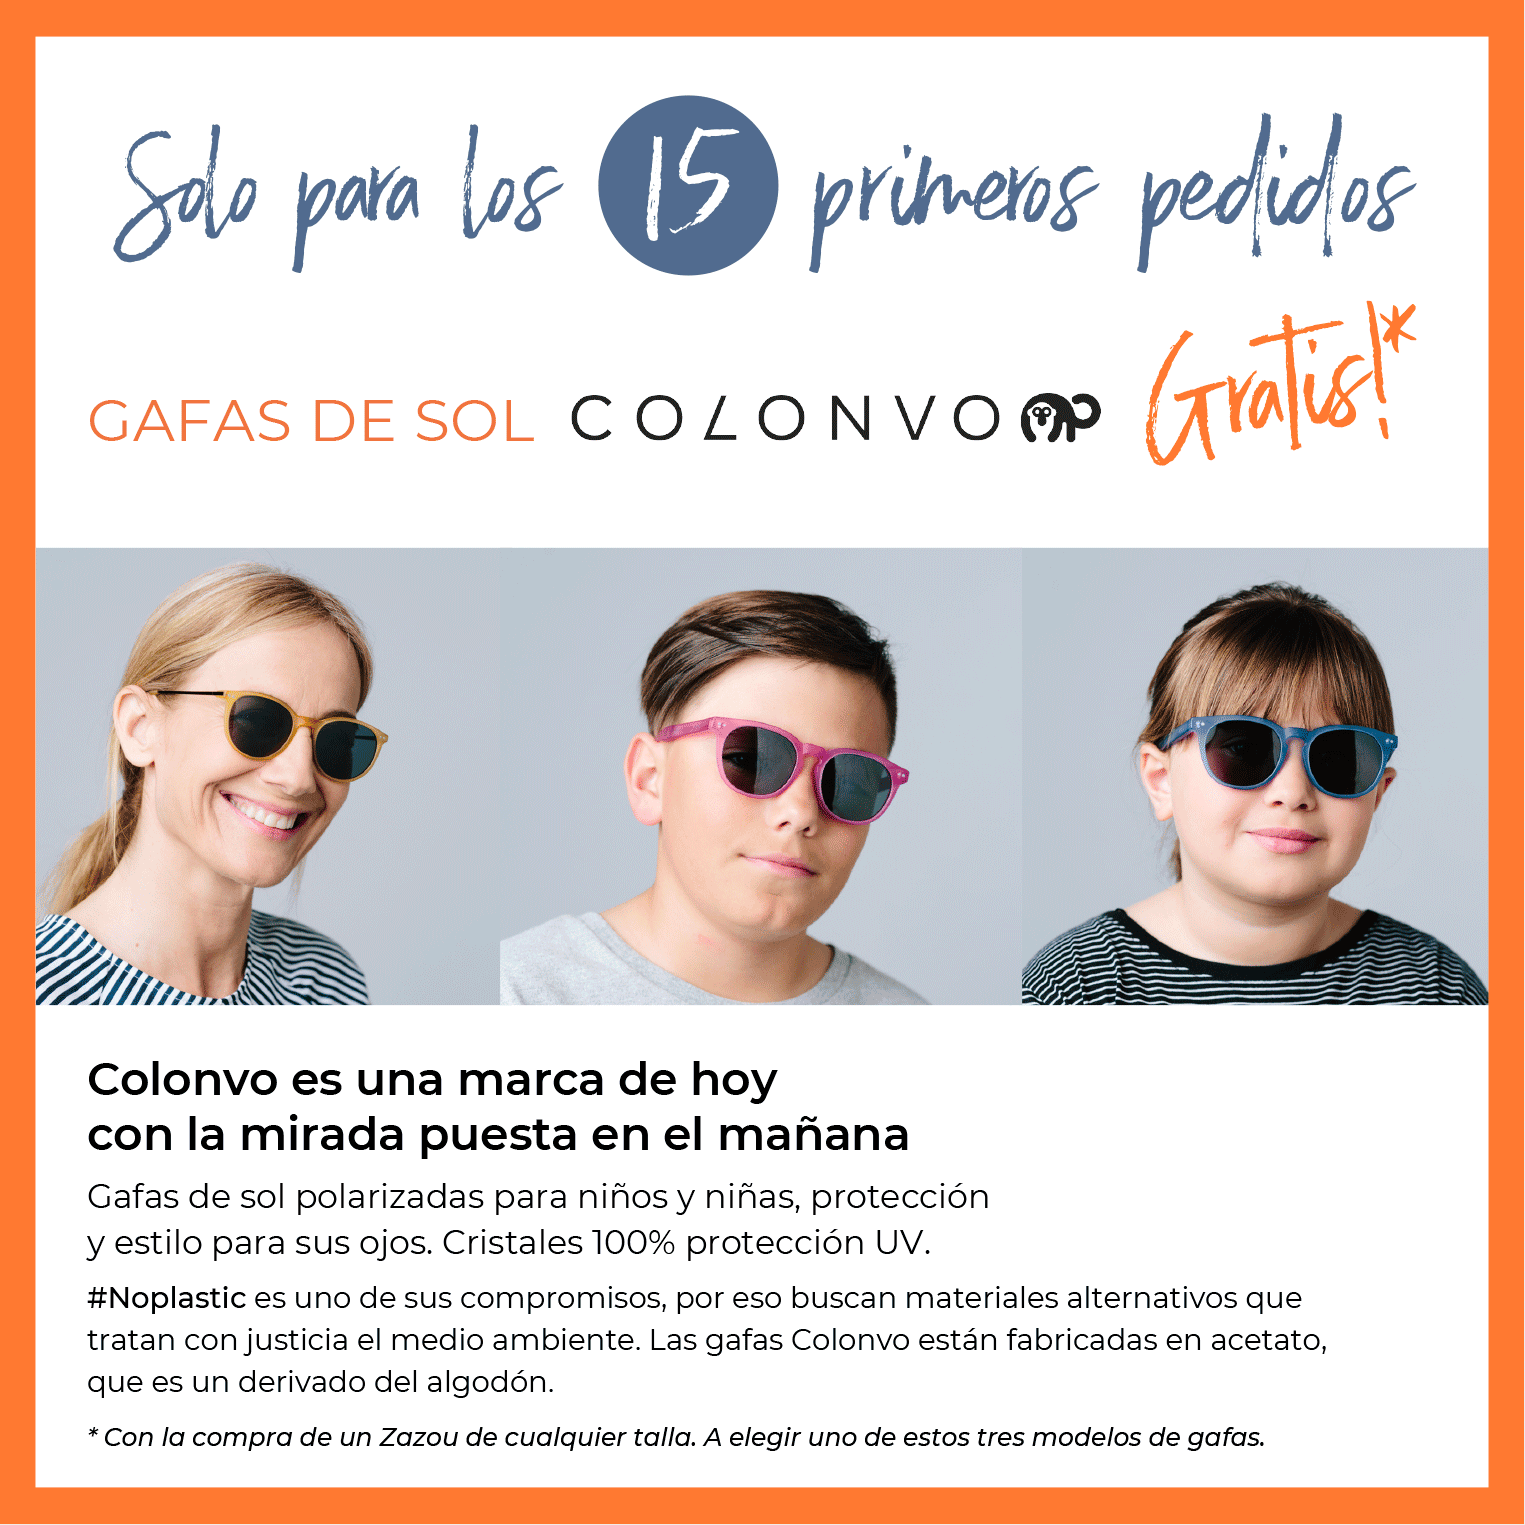 Free sunglasses just for the first 15 customers!